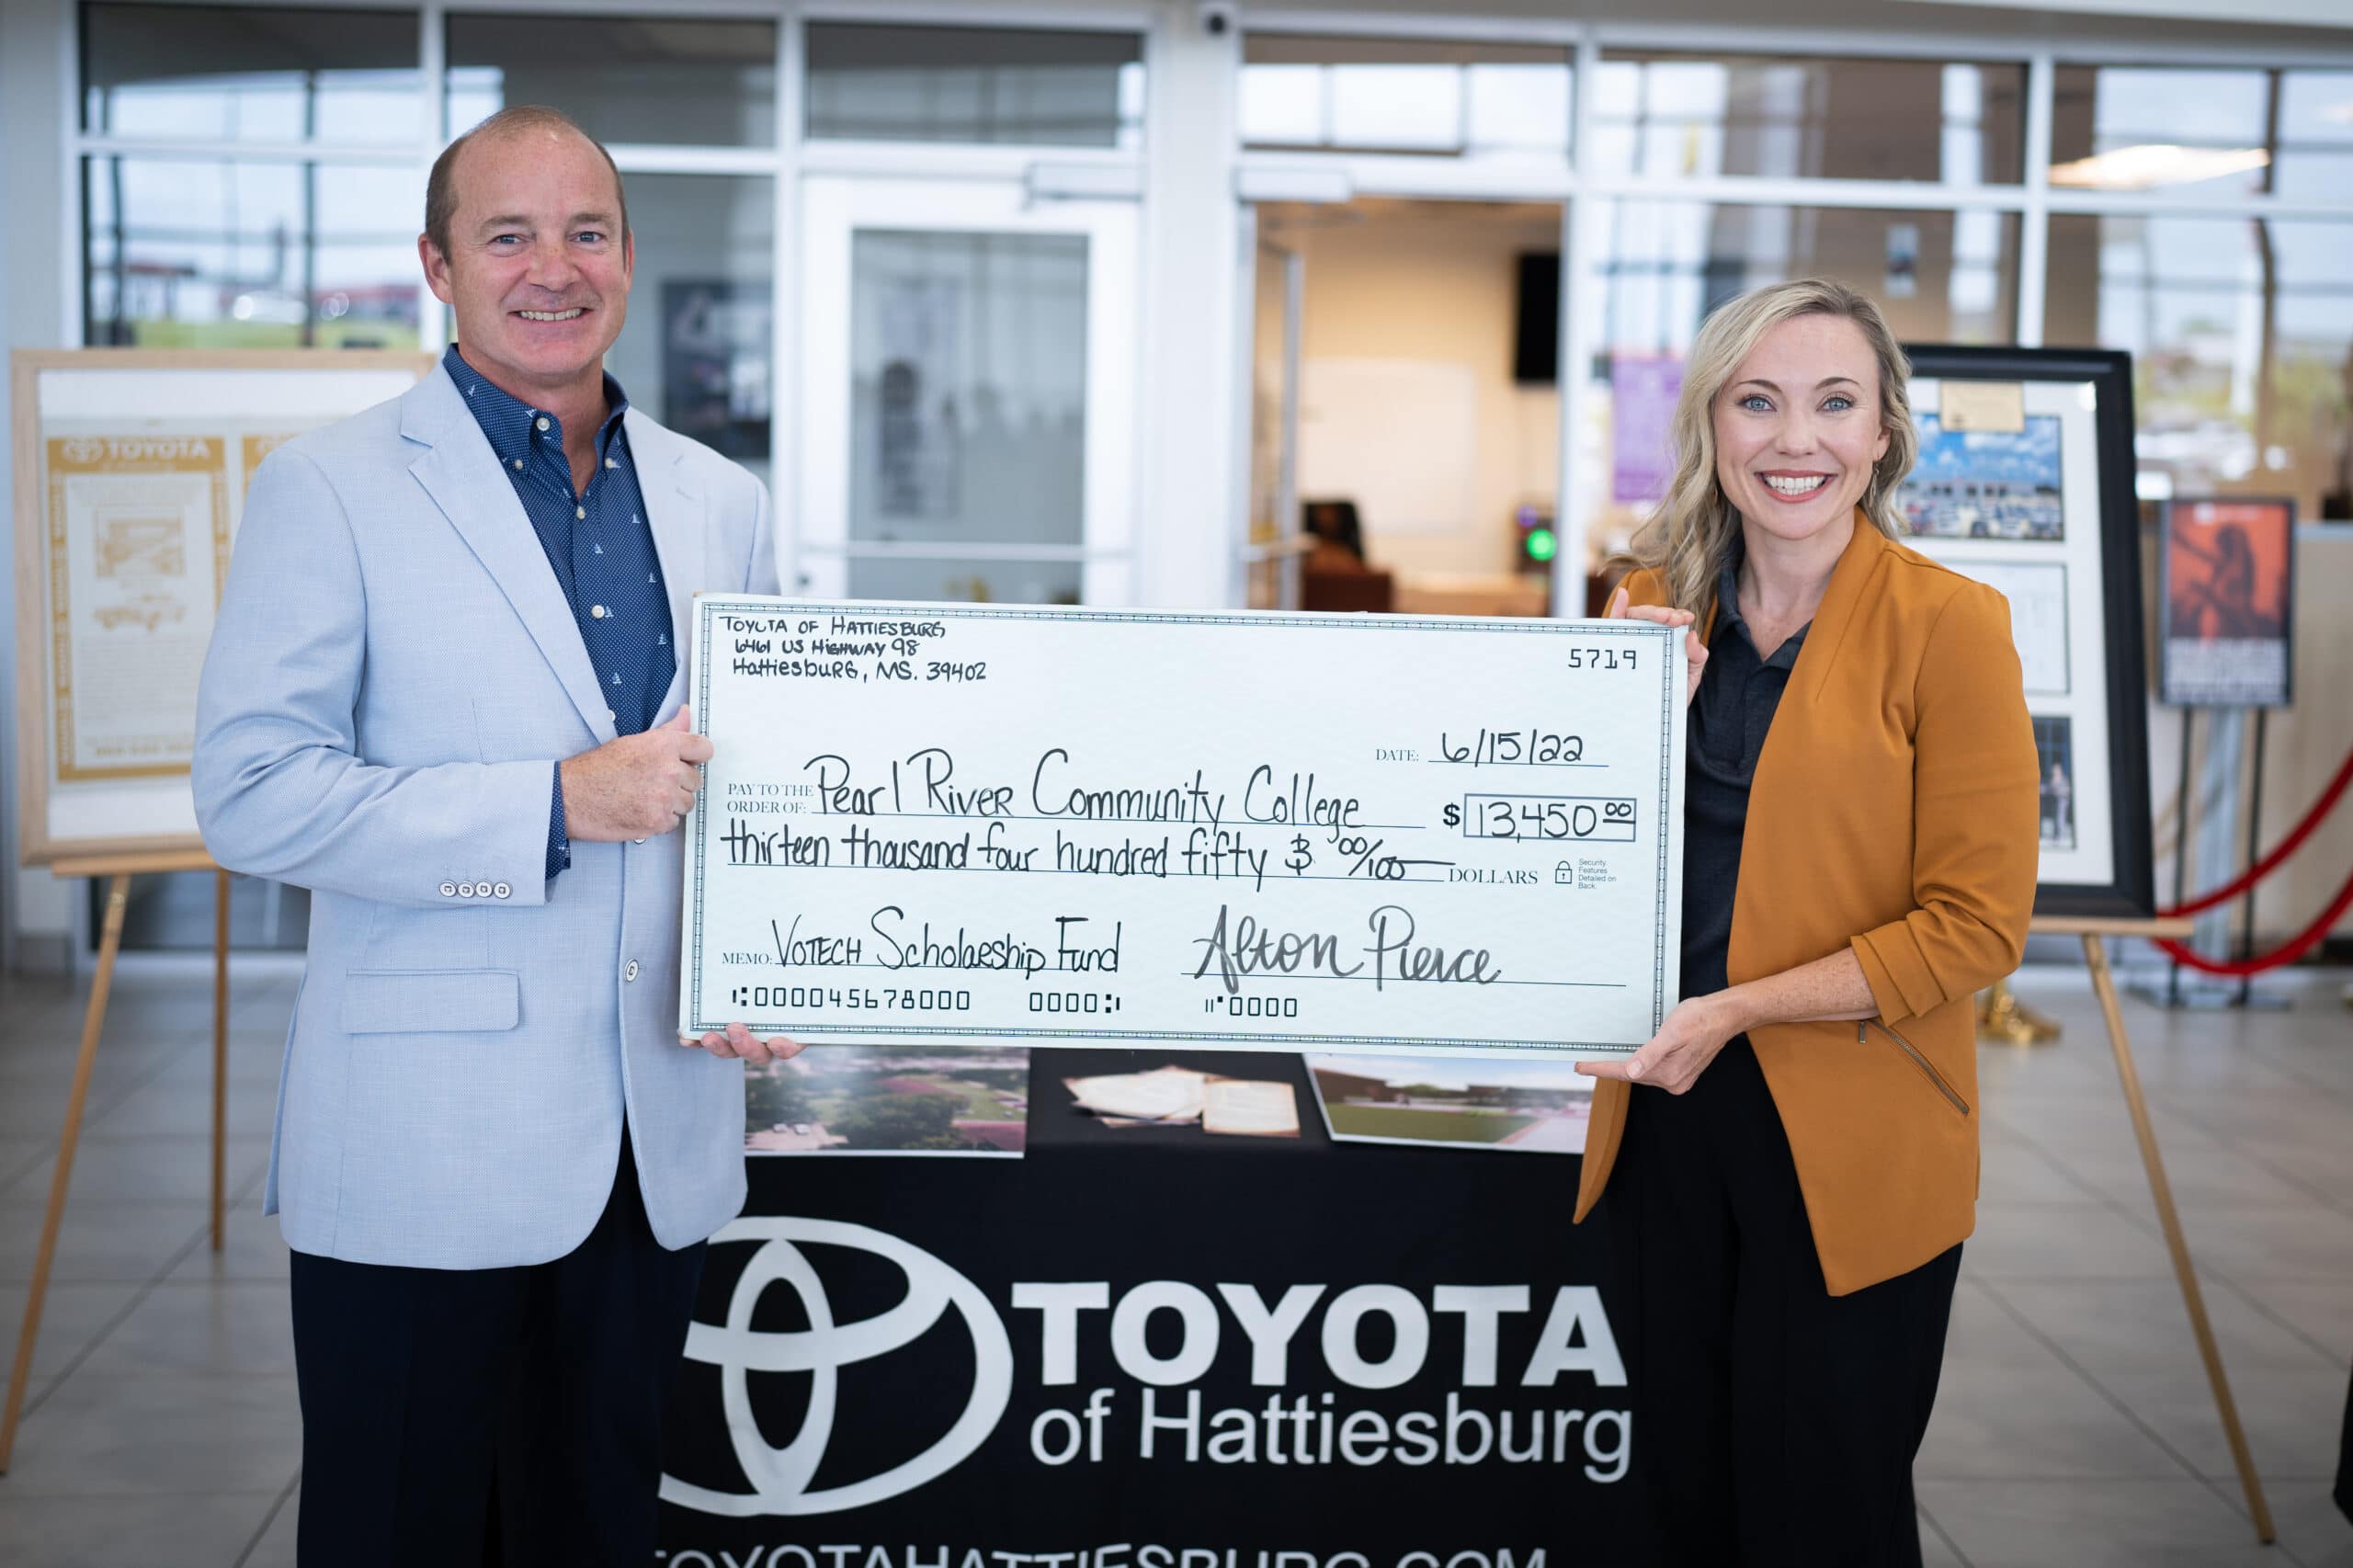 Alton Pierce from Toyota of Hattiesburg presents donation to Delana Harris of Pearl River Community College